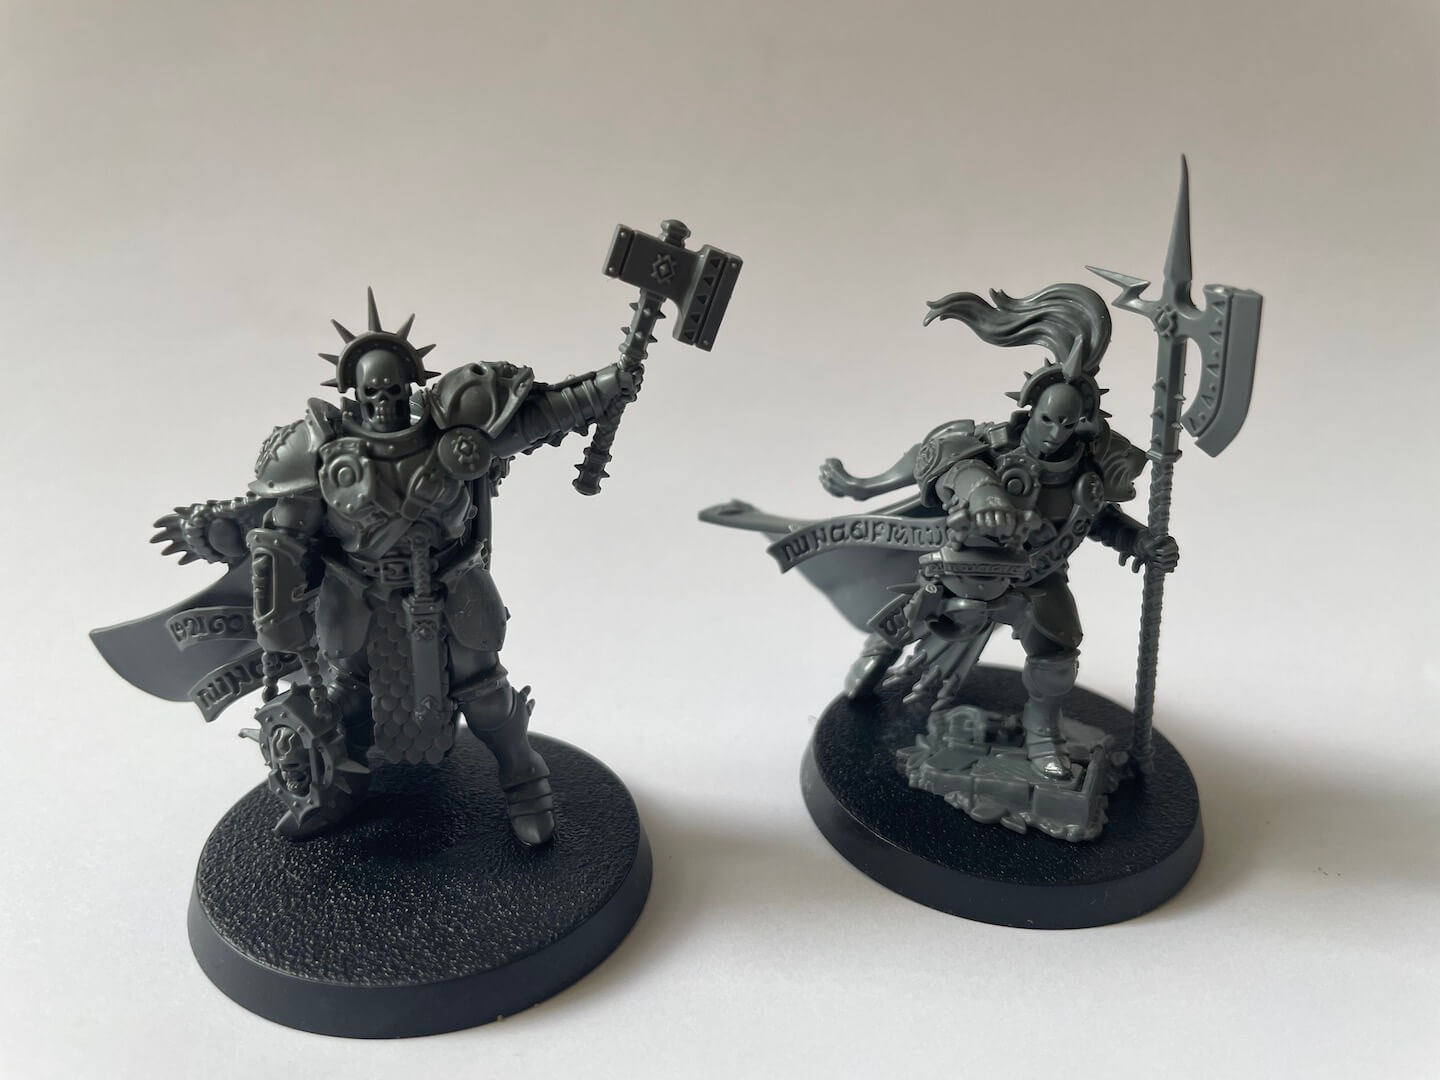 An image depicting figures from Warcry Nightmare Quest 